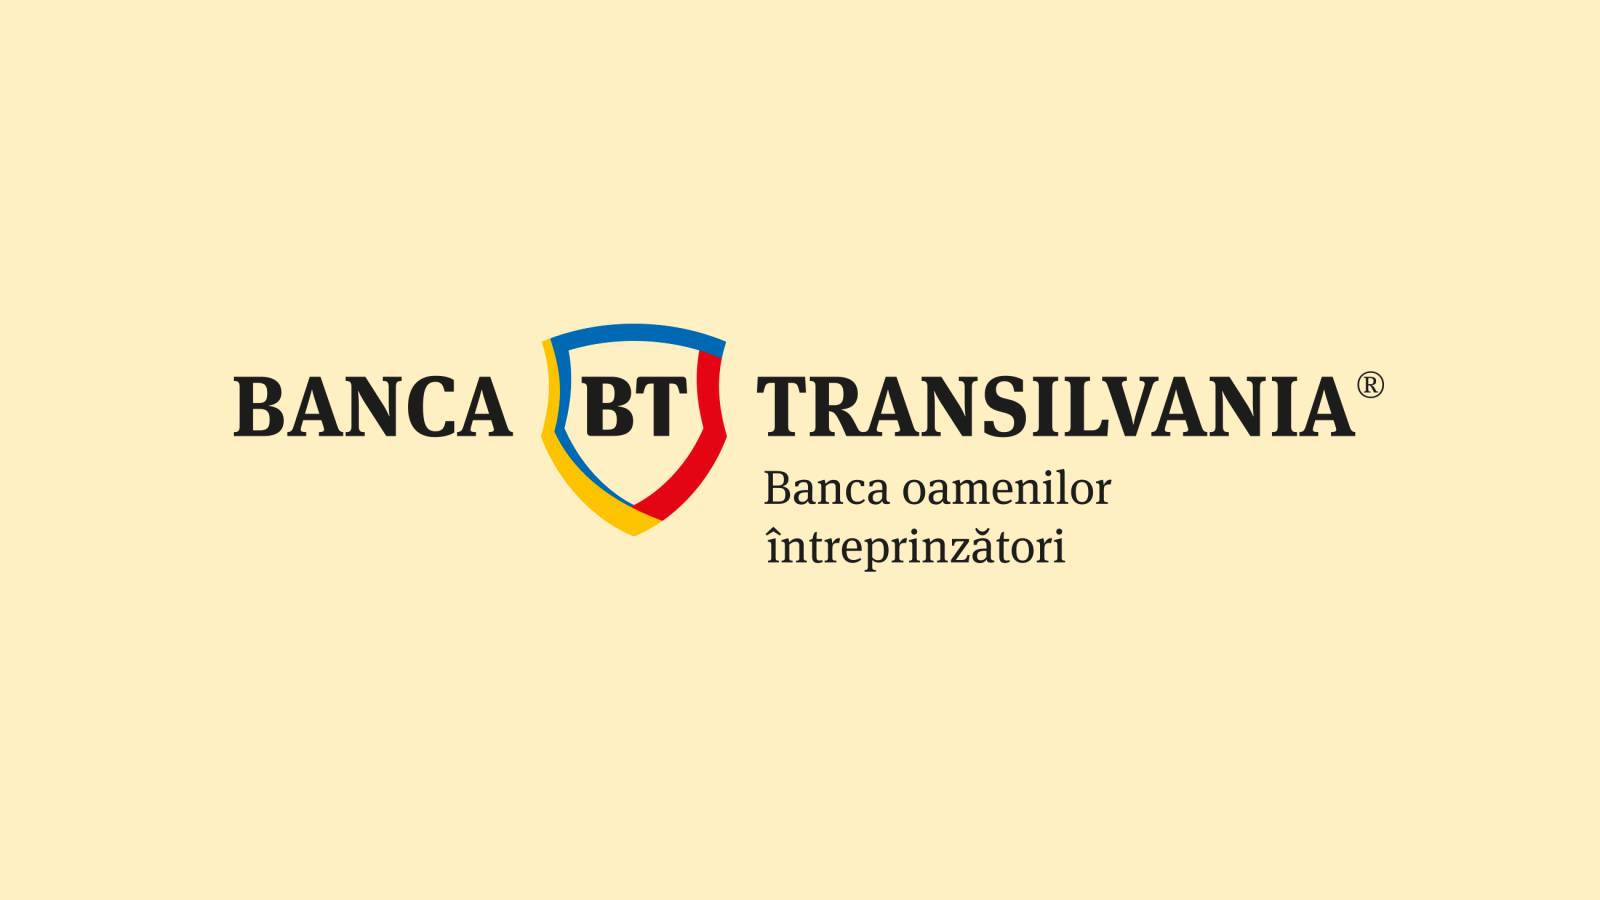 BANCA Transilvania Officially Sends IMPORTANT Notice to Customers Today